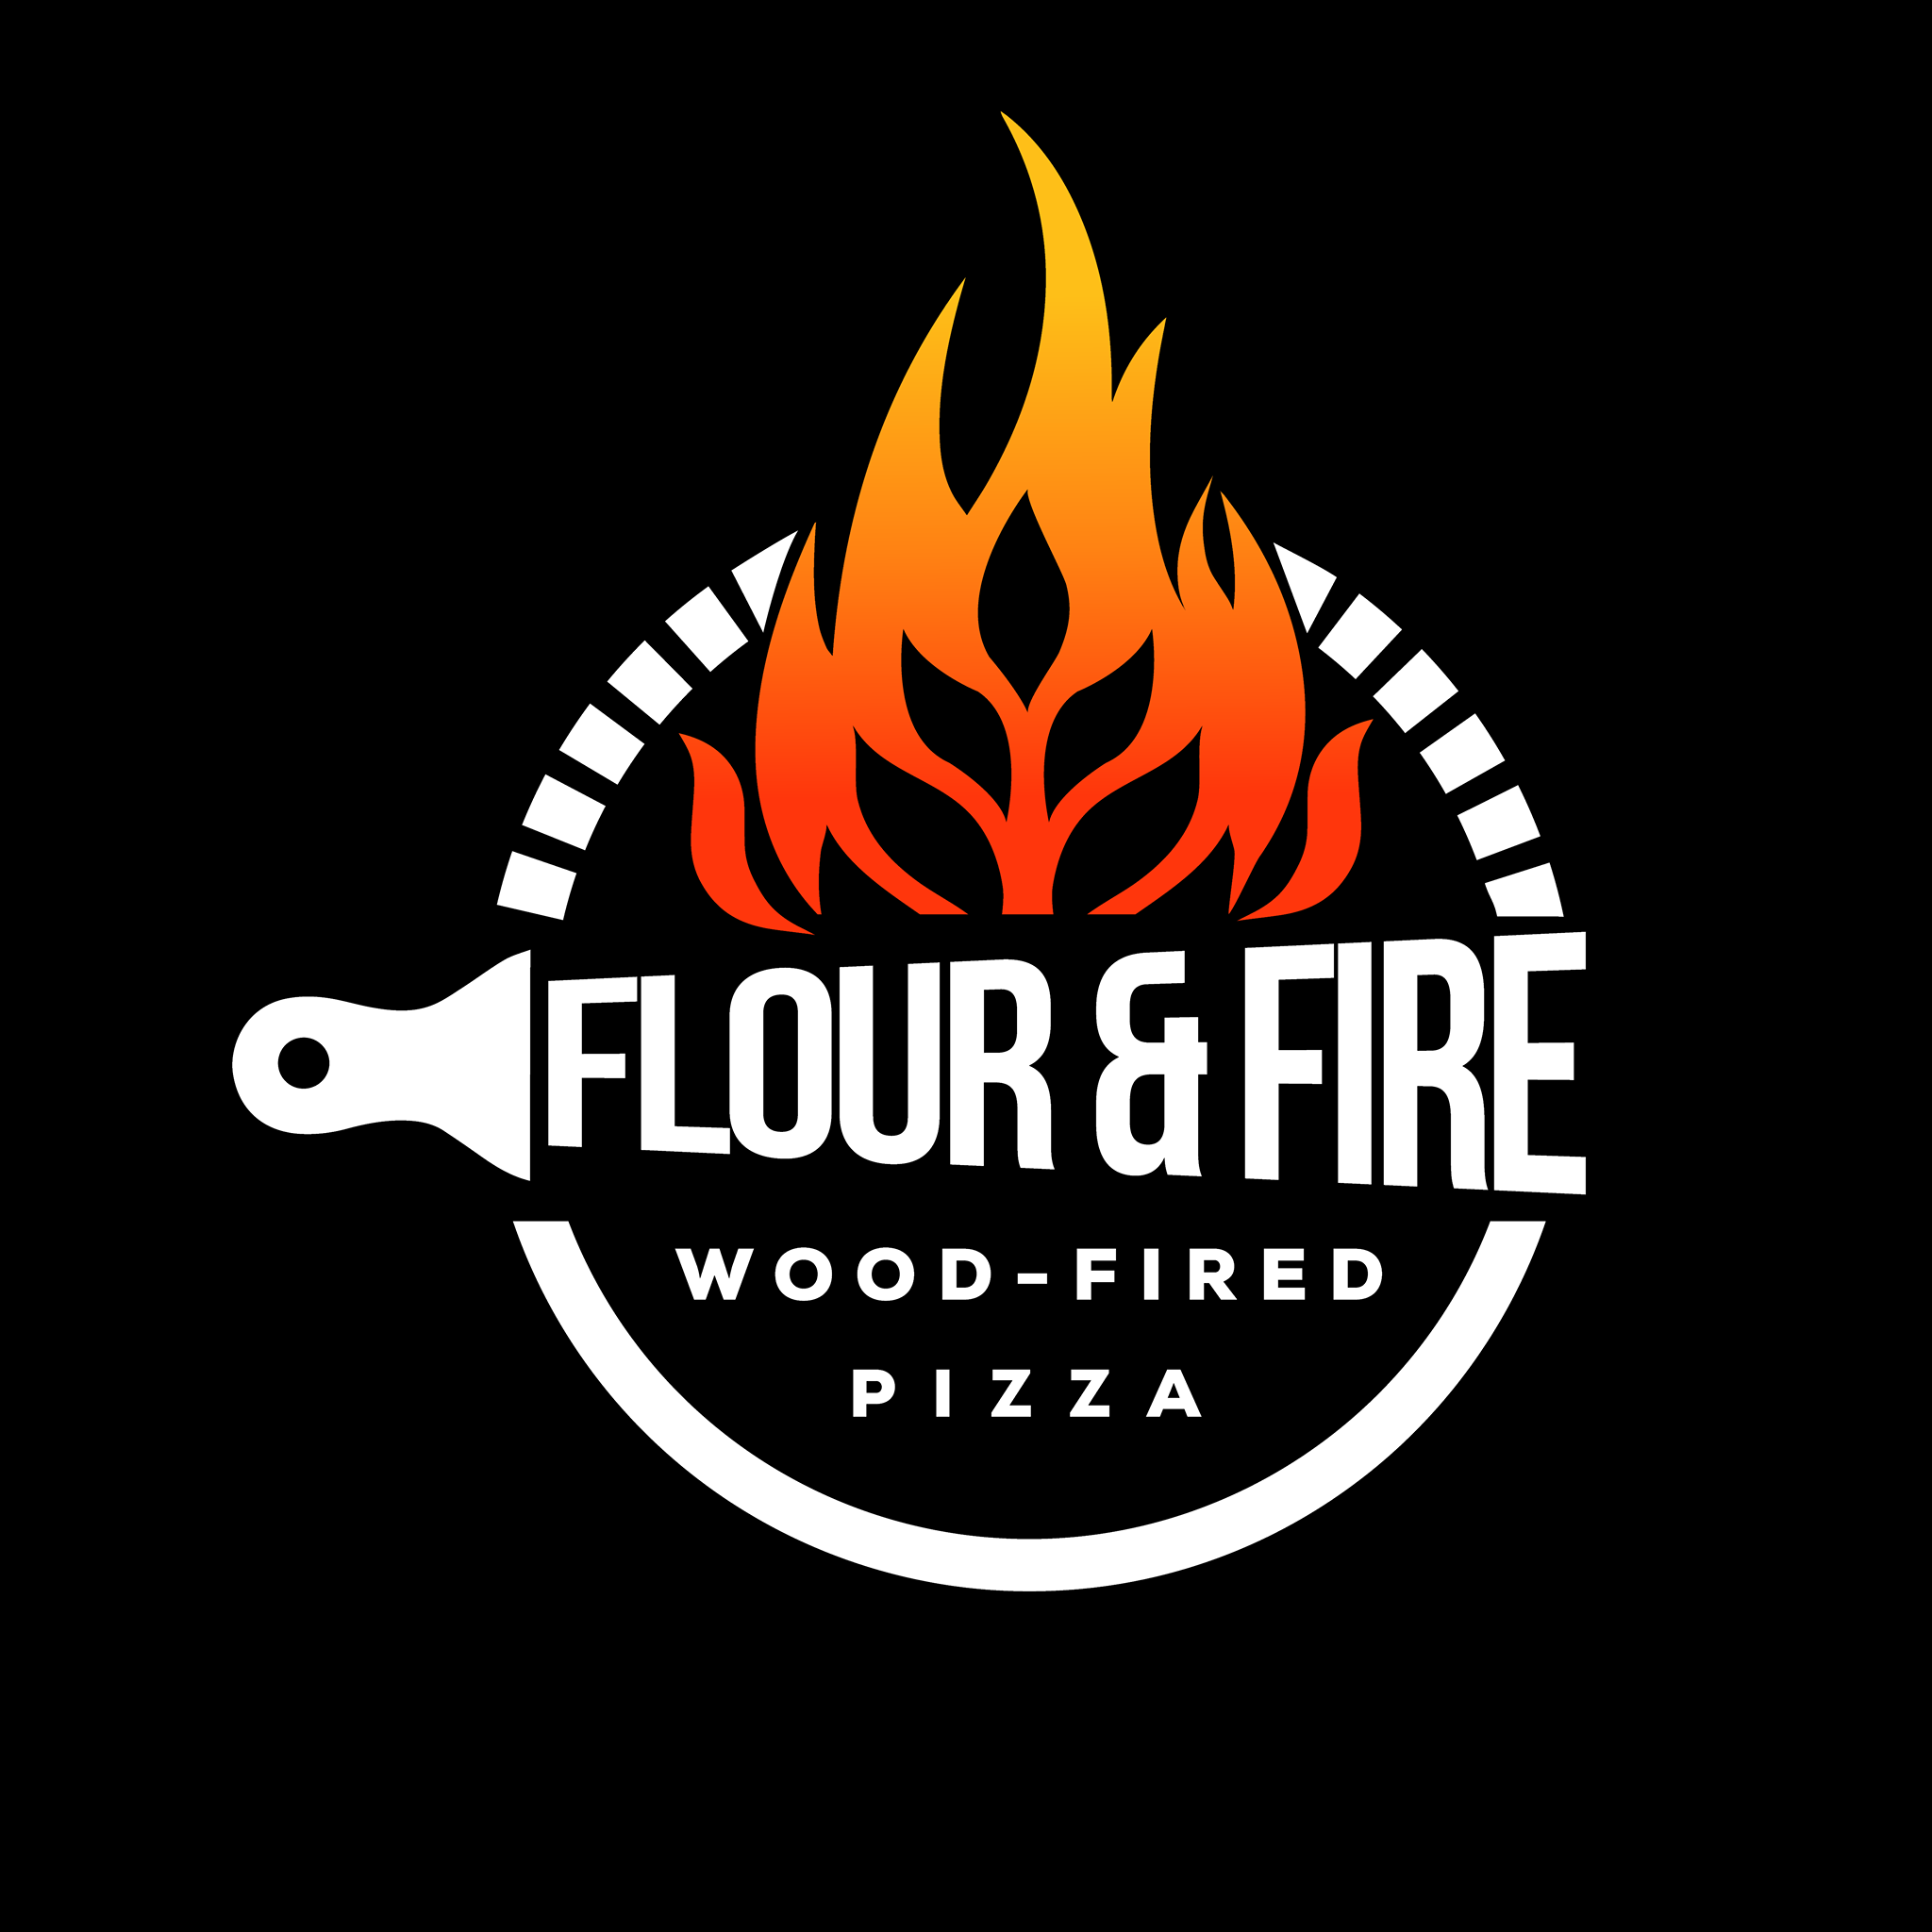 Logo for Flour & Fire Wood-Fired Pizza.